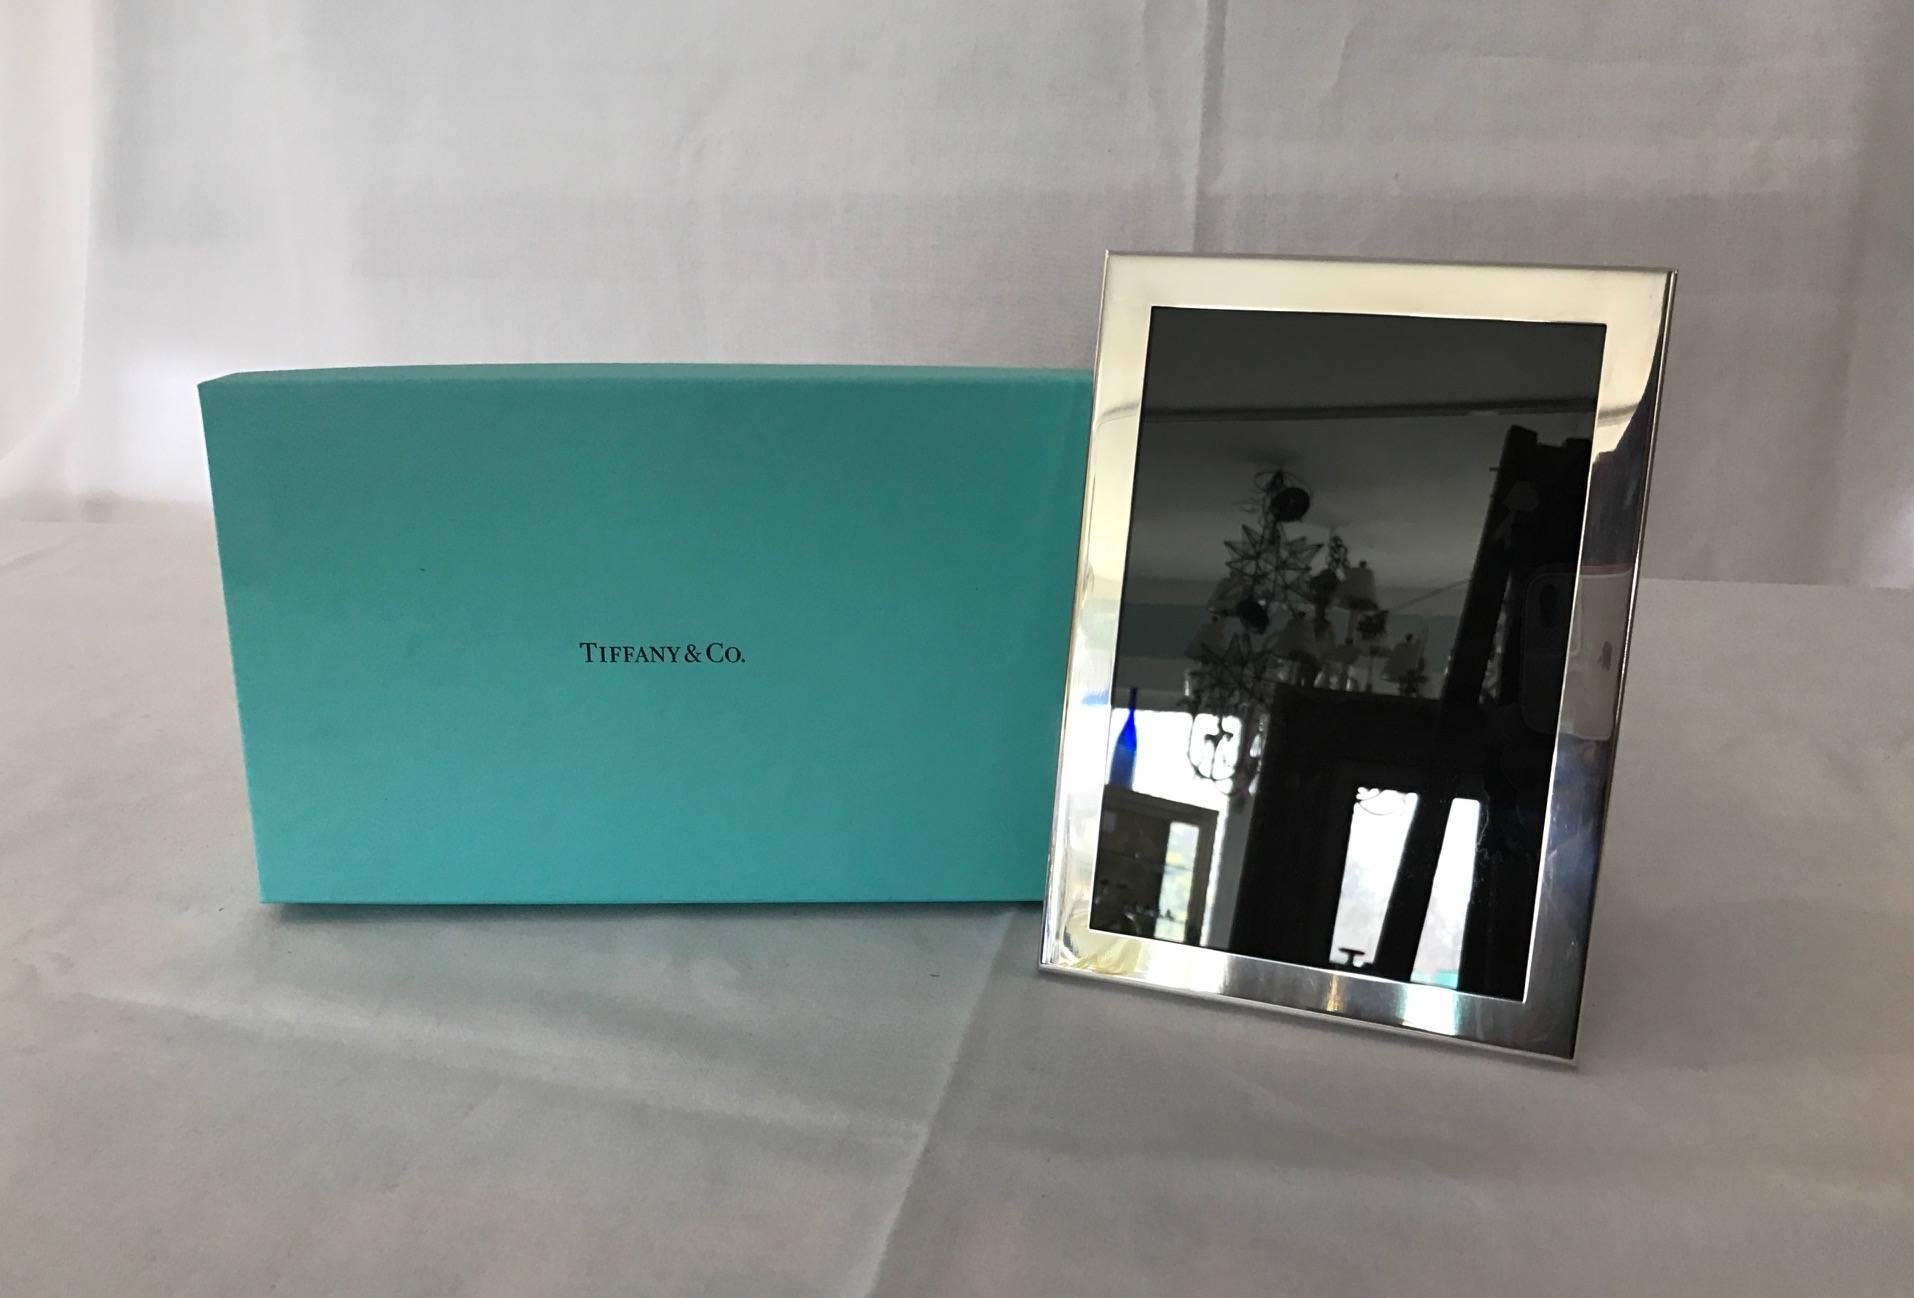 Tiffany blue box pewter frame. Measure: Holds 5 x 7 photograph. Really Pretty. Never Used. Stamped and with Tiffany blue pouch and box.